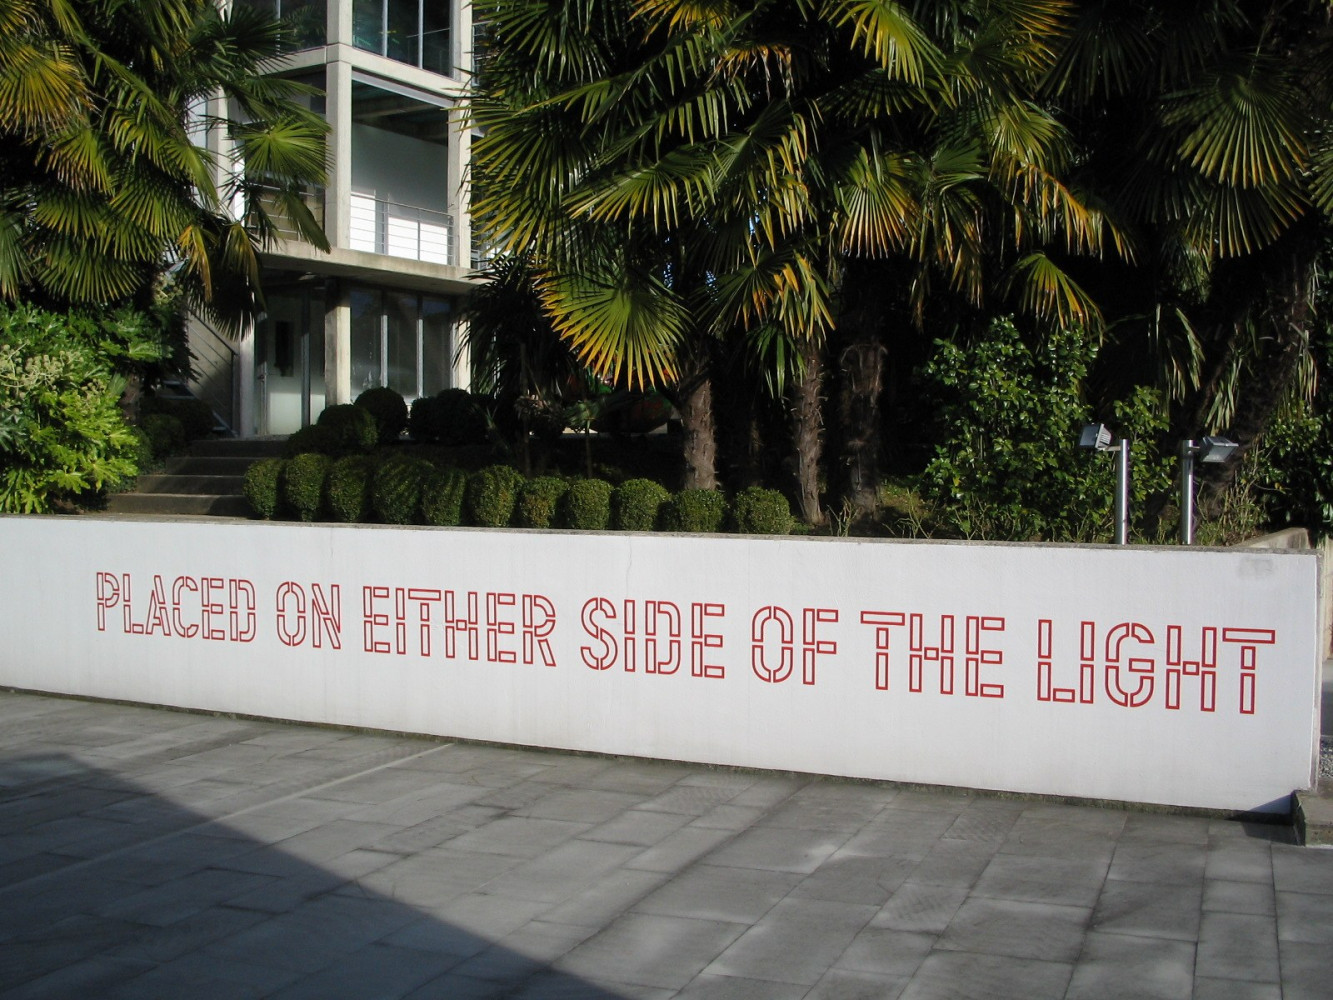 Lawrence Weiner, ‘Placed on the other side of light’, 2008